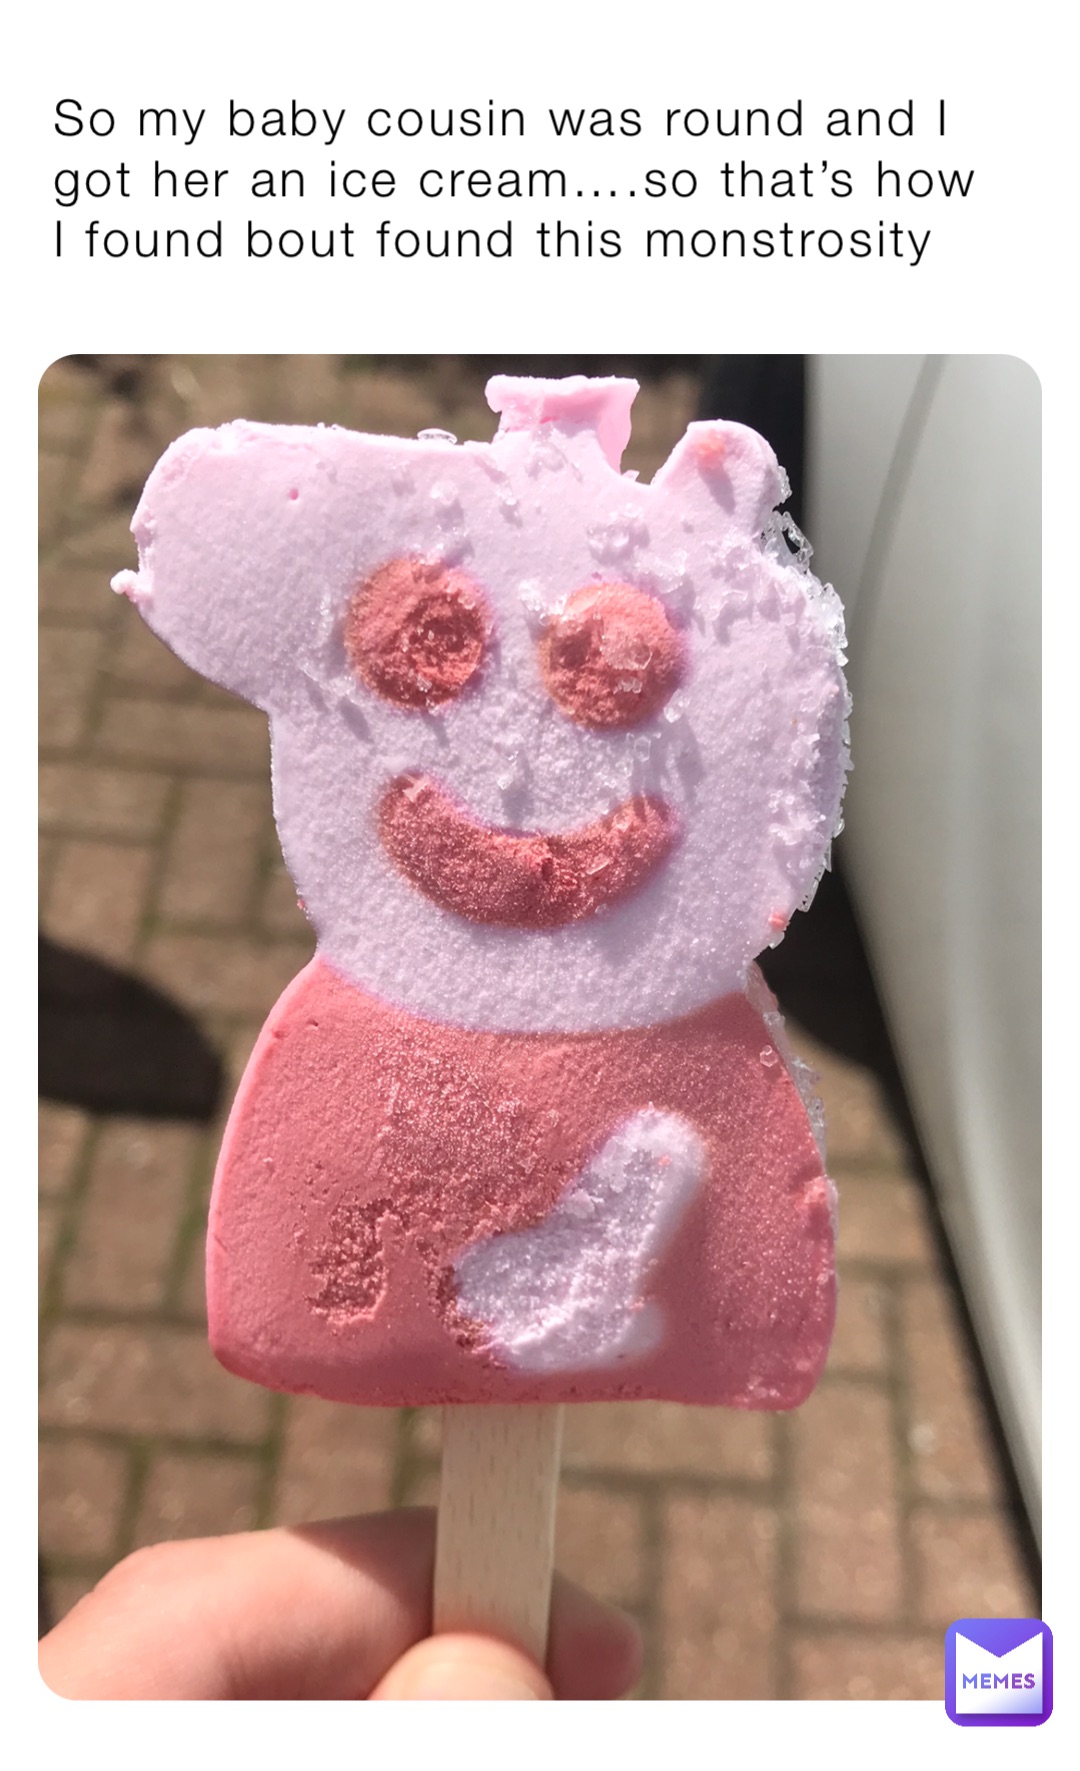 So my baby cousin was round and I got her an ice cream….so that’s how I found bout found this monstrosity